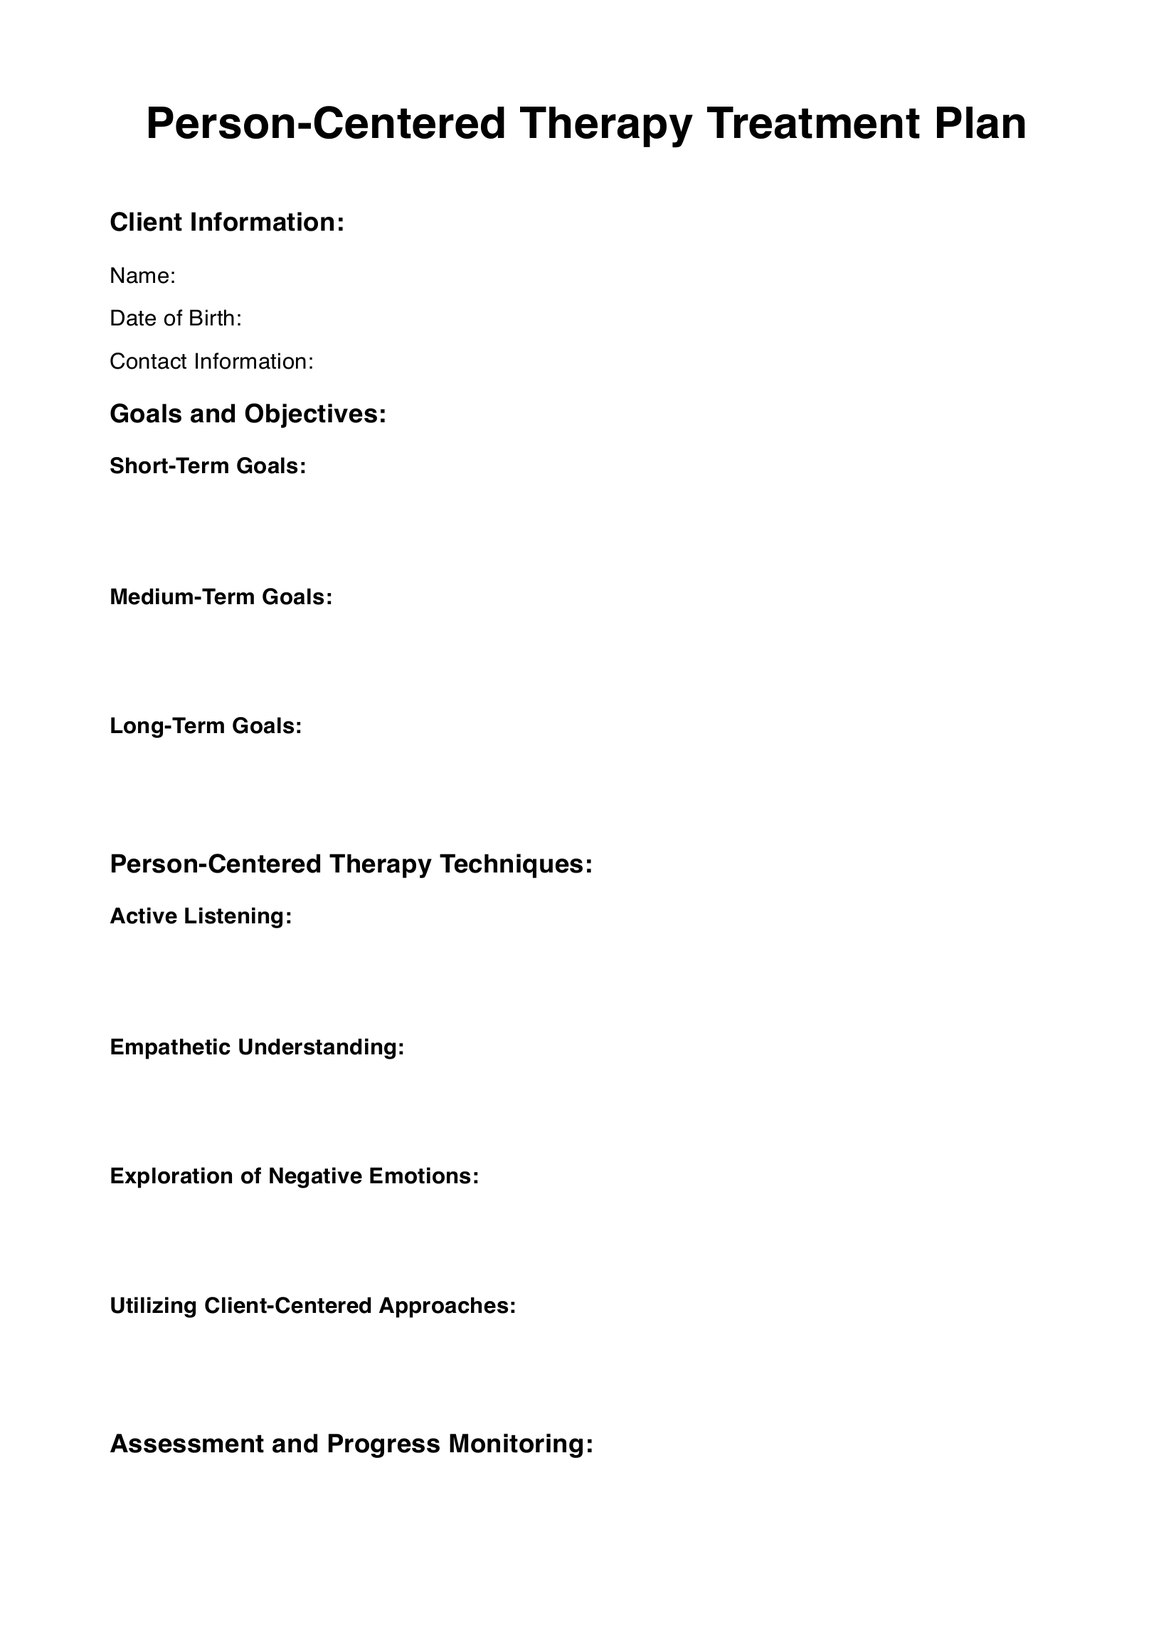 Person-Centered Therapy Treatment Plan PDF Example